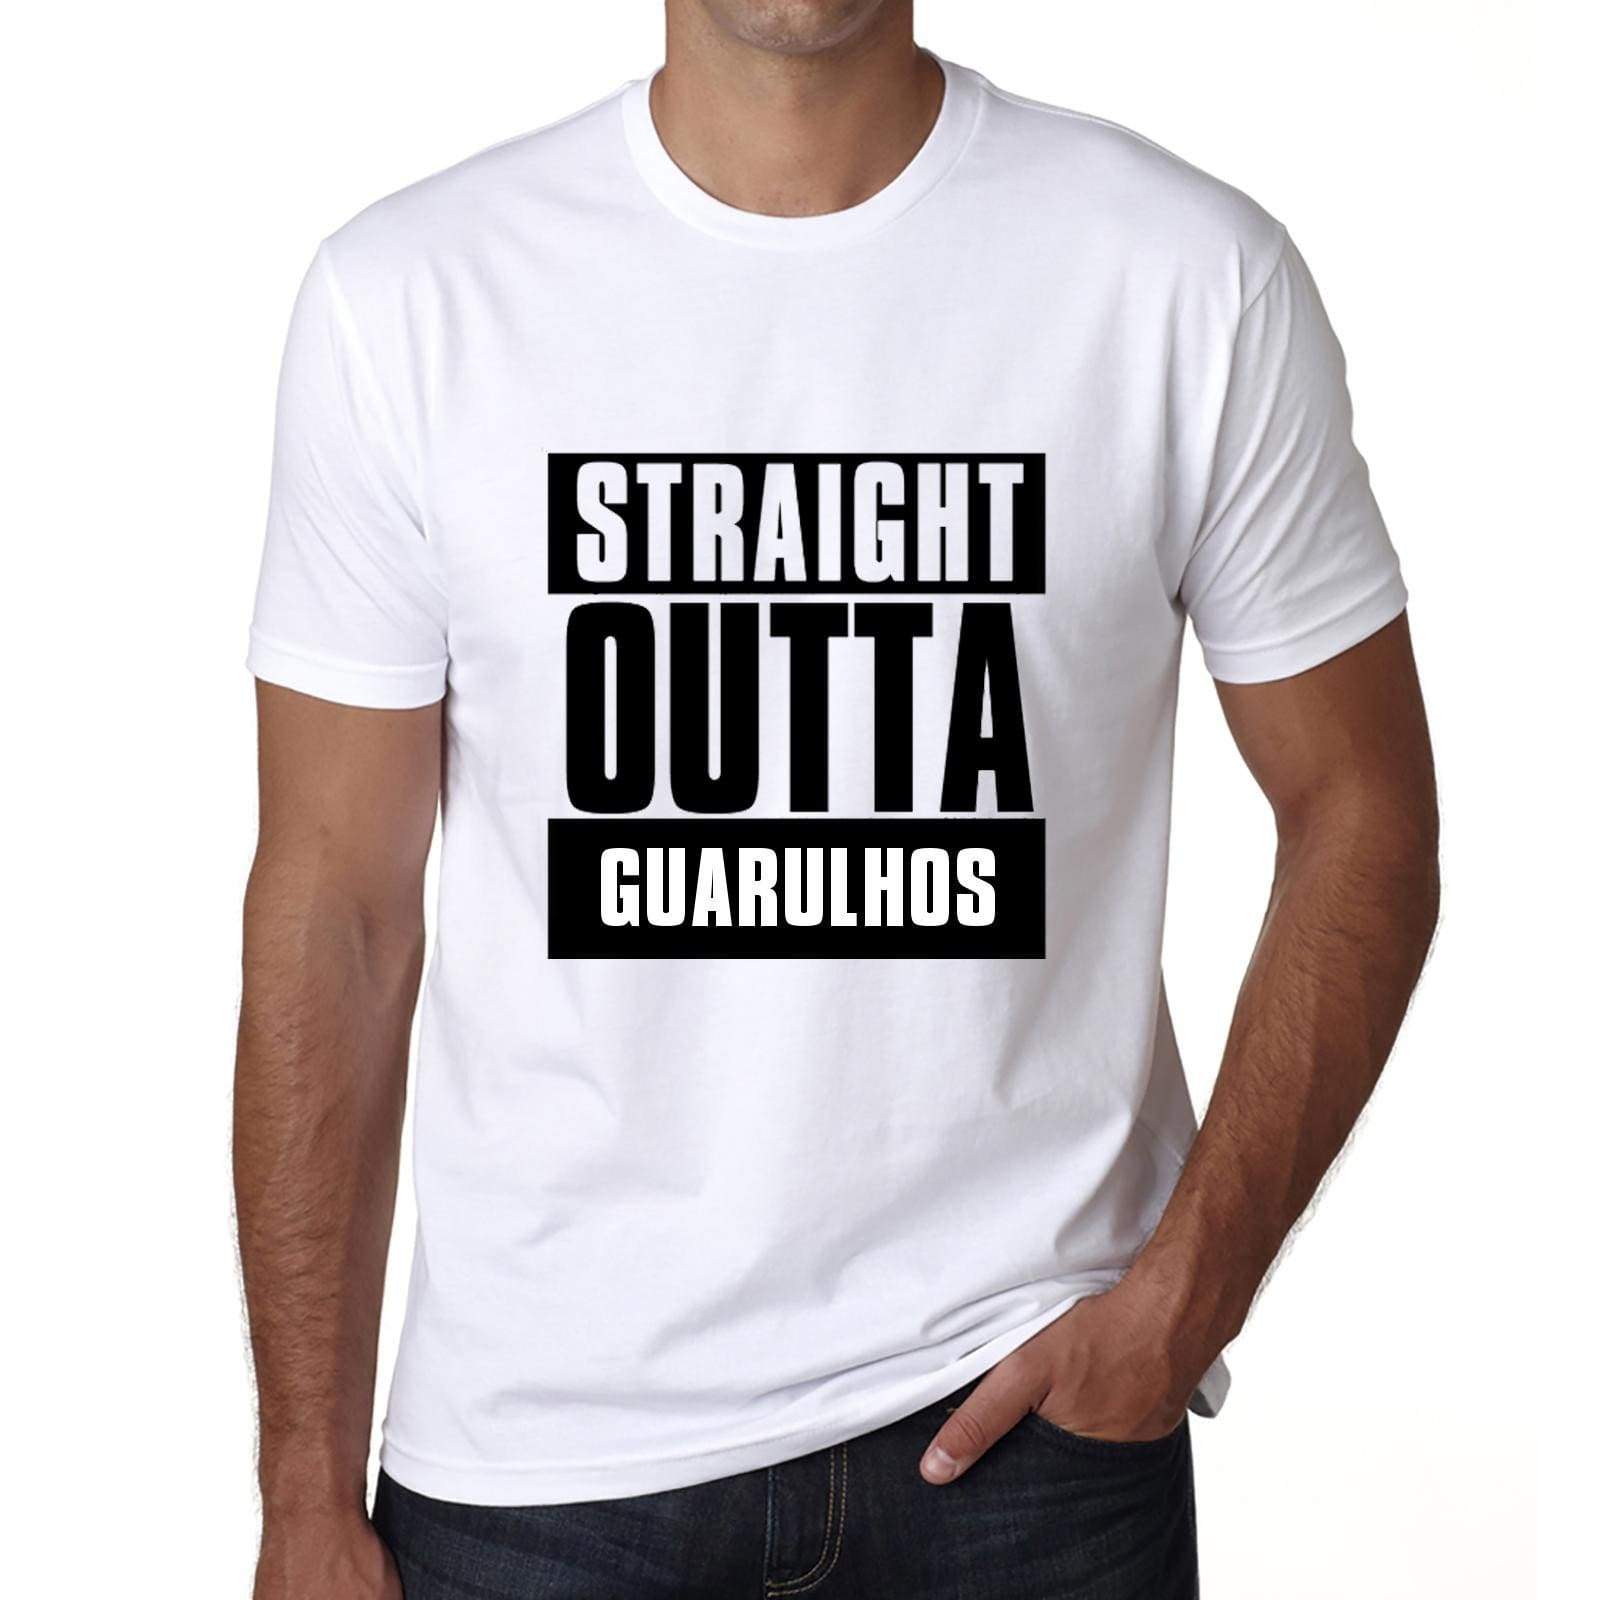 Straight Outta Guarulhos Mens Short Sleeve Round Neck T-Shirt 00027 - White / S - Casual